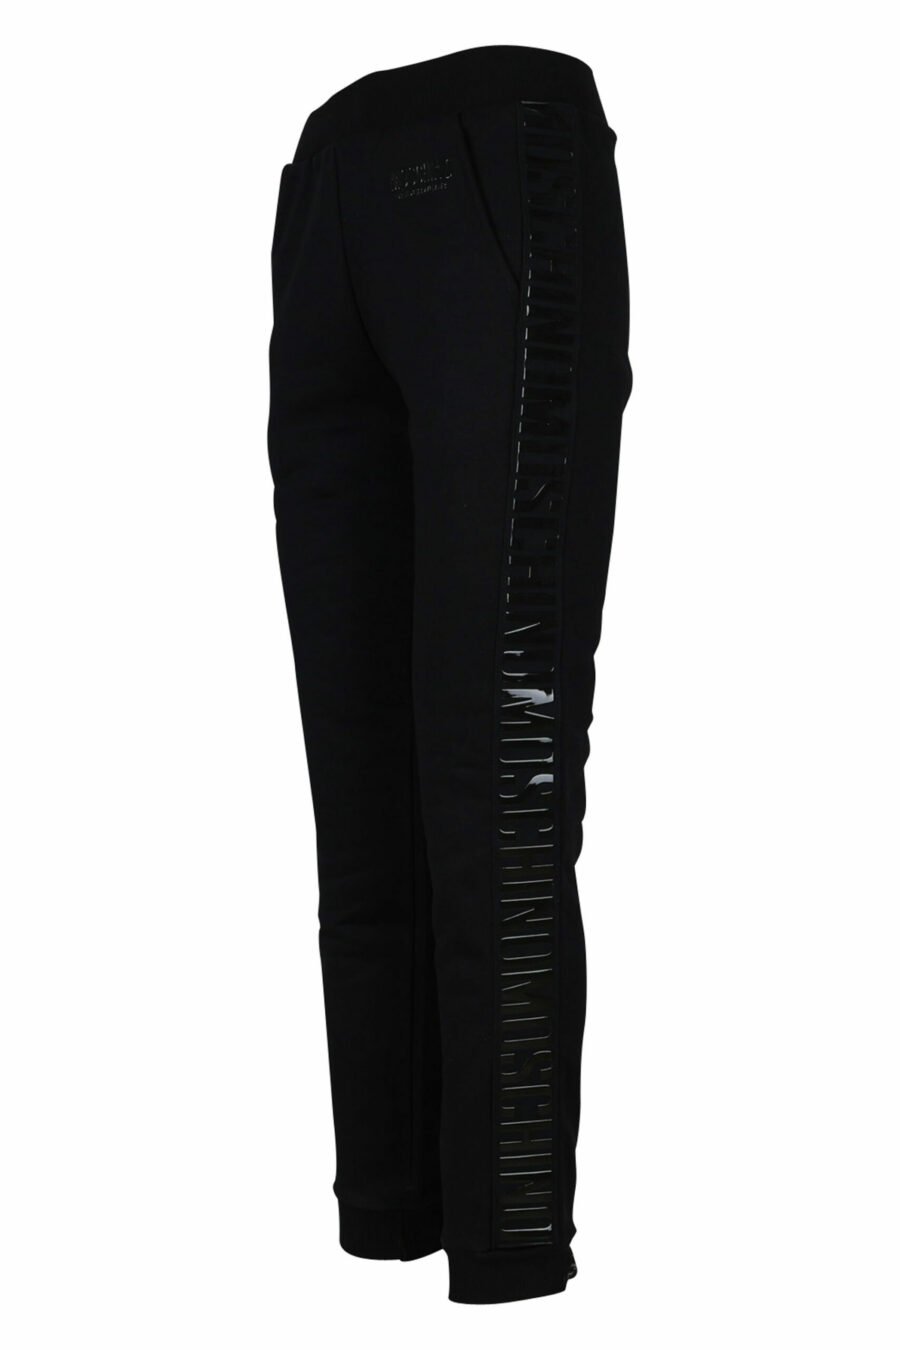 Tracksuit bottoms black with monochrome ribbon logo on sides - 889316614978 1 scaled